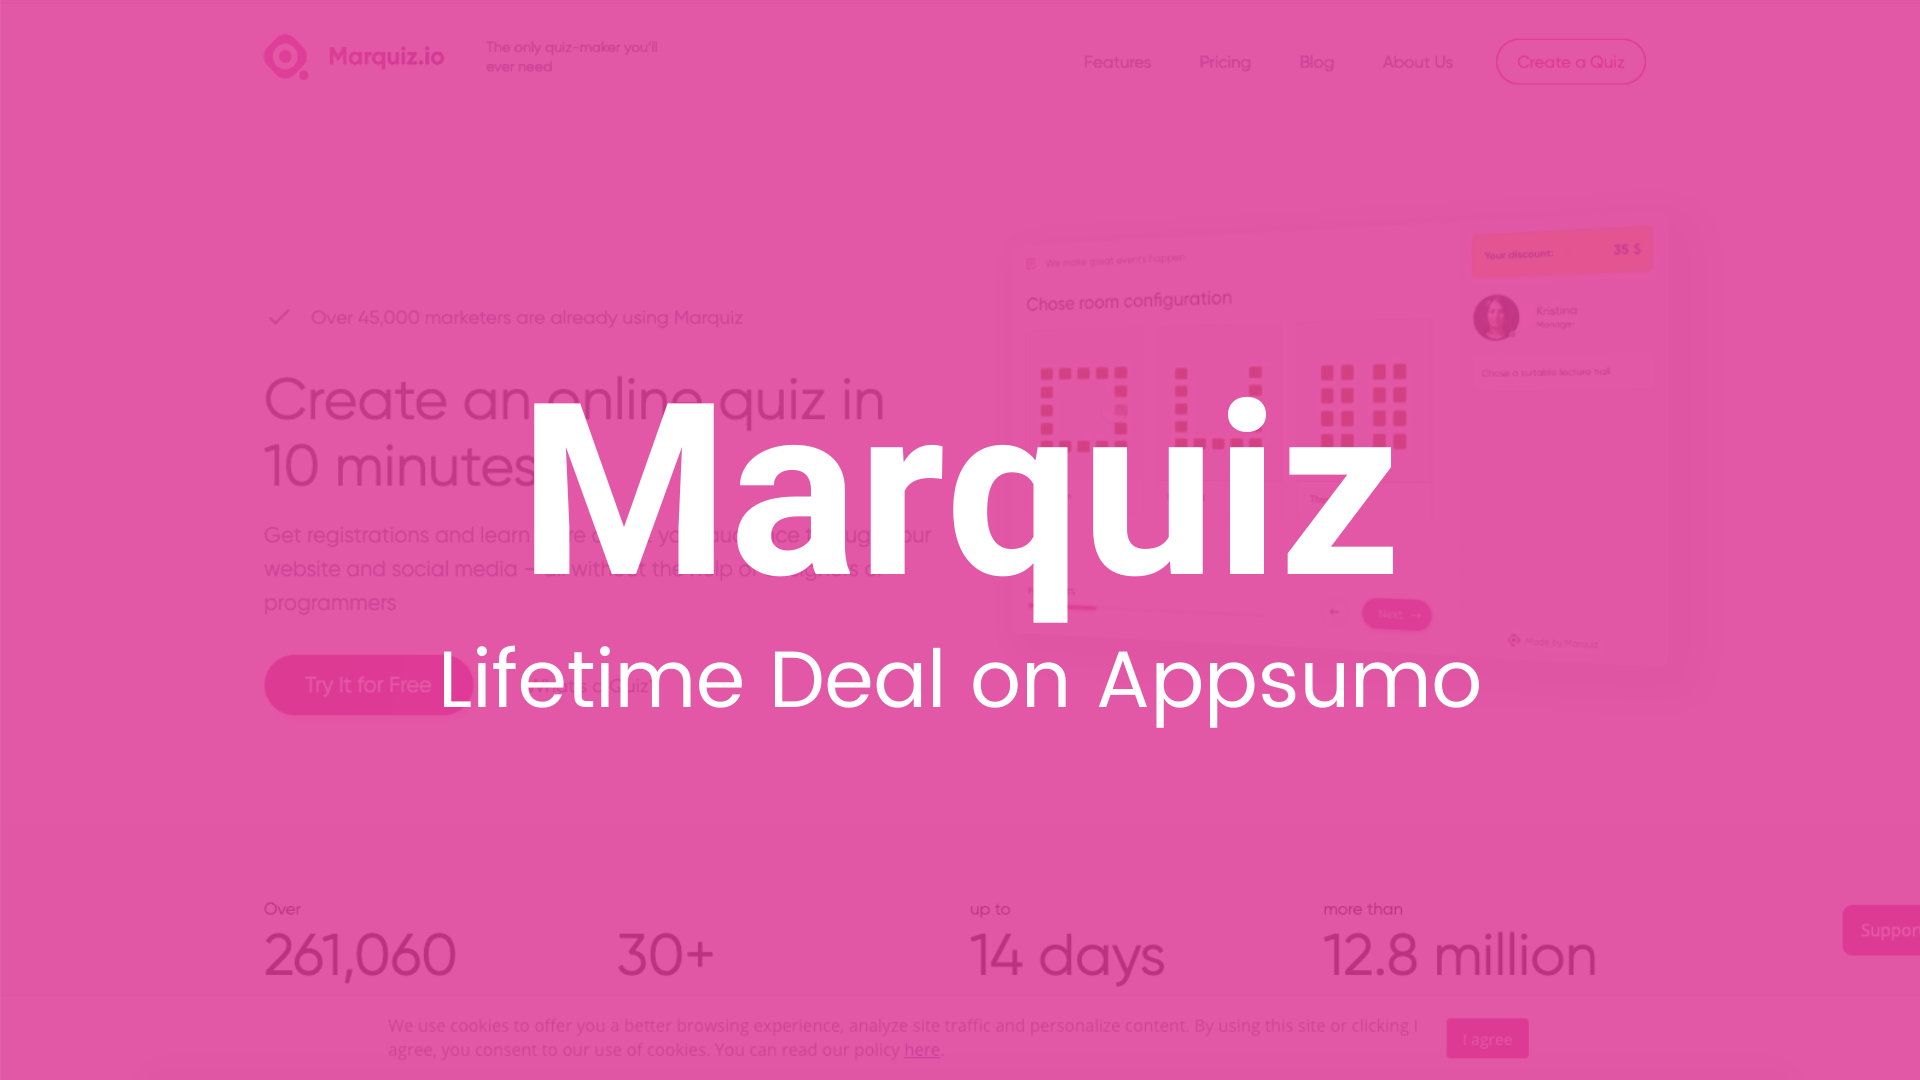 Marquiz: Creating Online Quizzes in Minutes